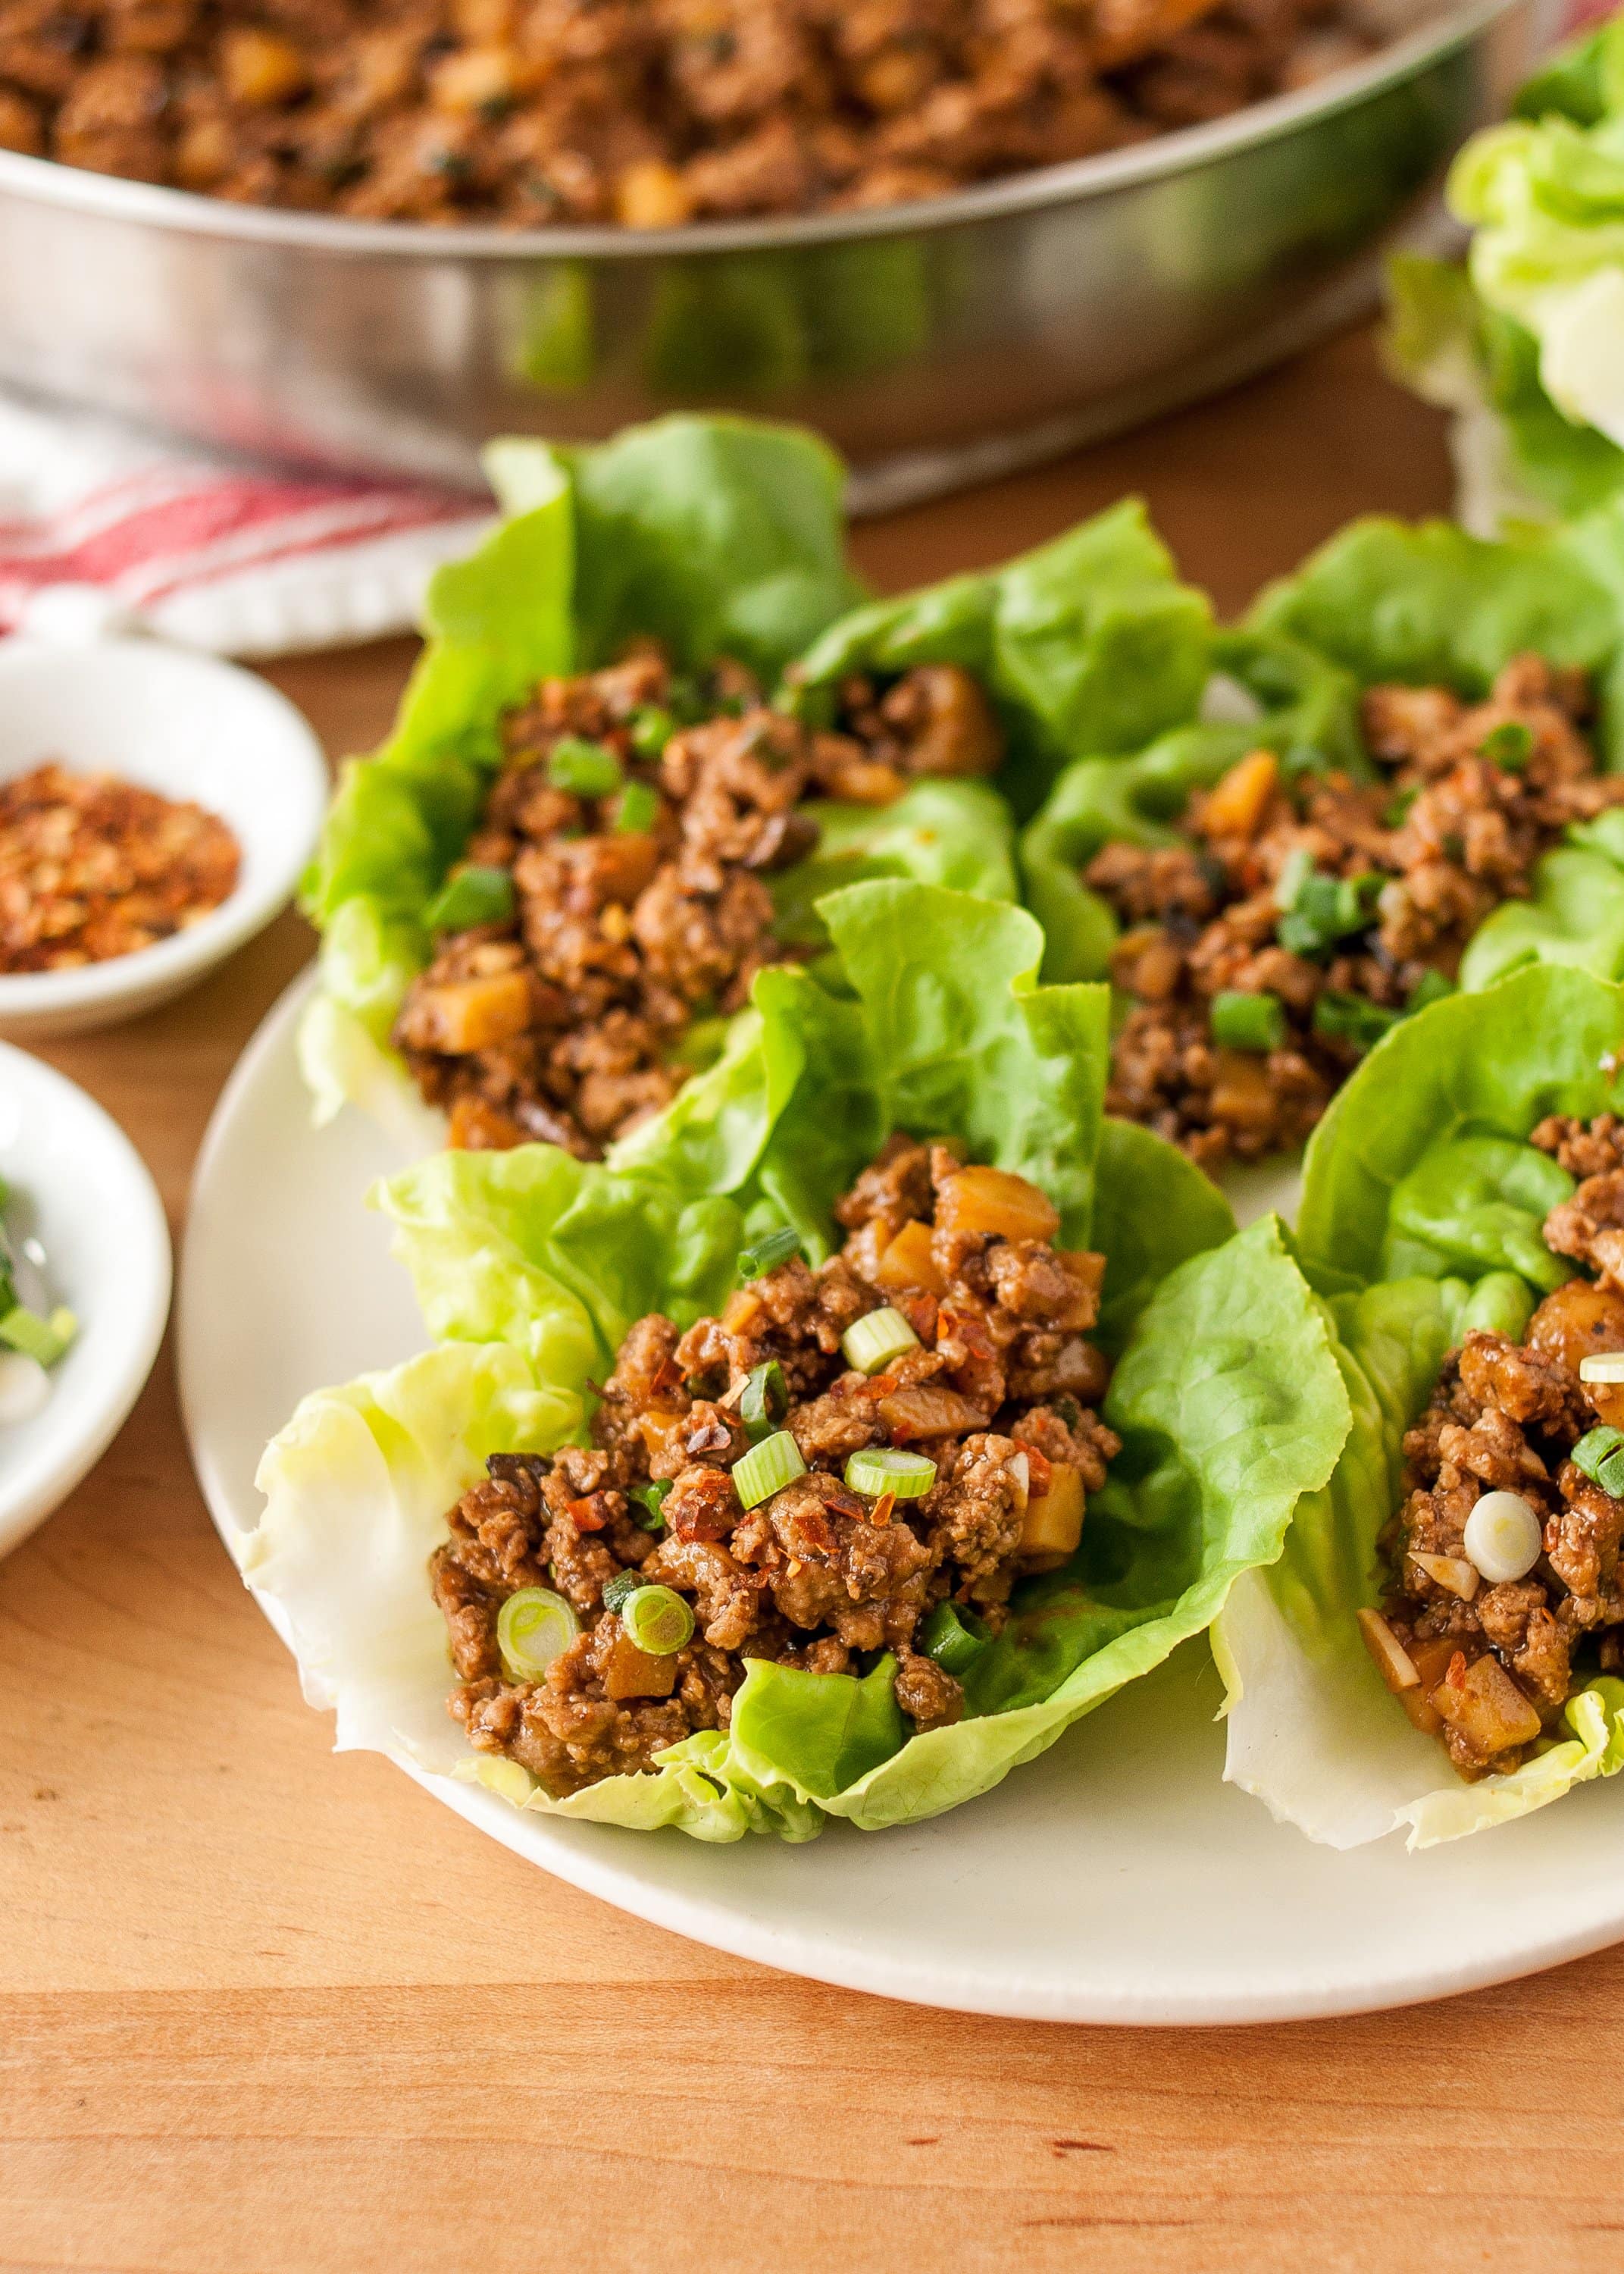 How To Make Chicken Lettuce Wraps | Kitchn